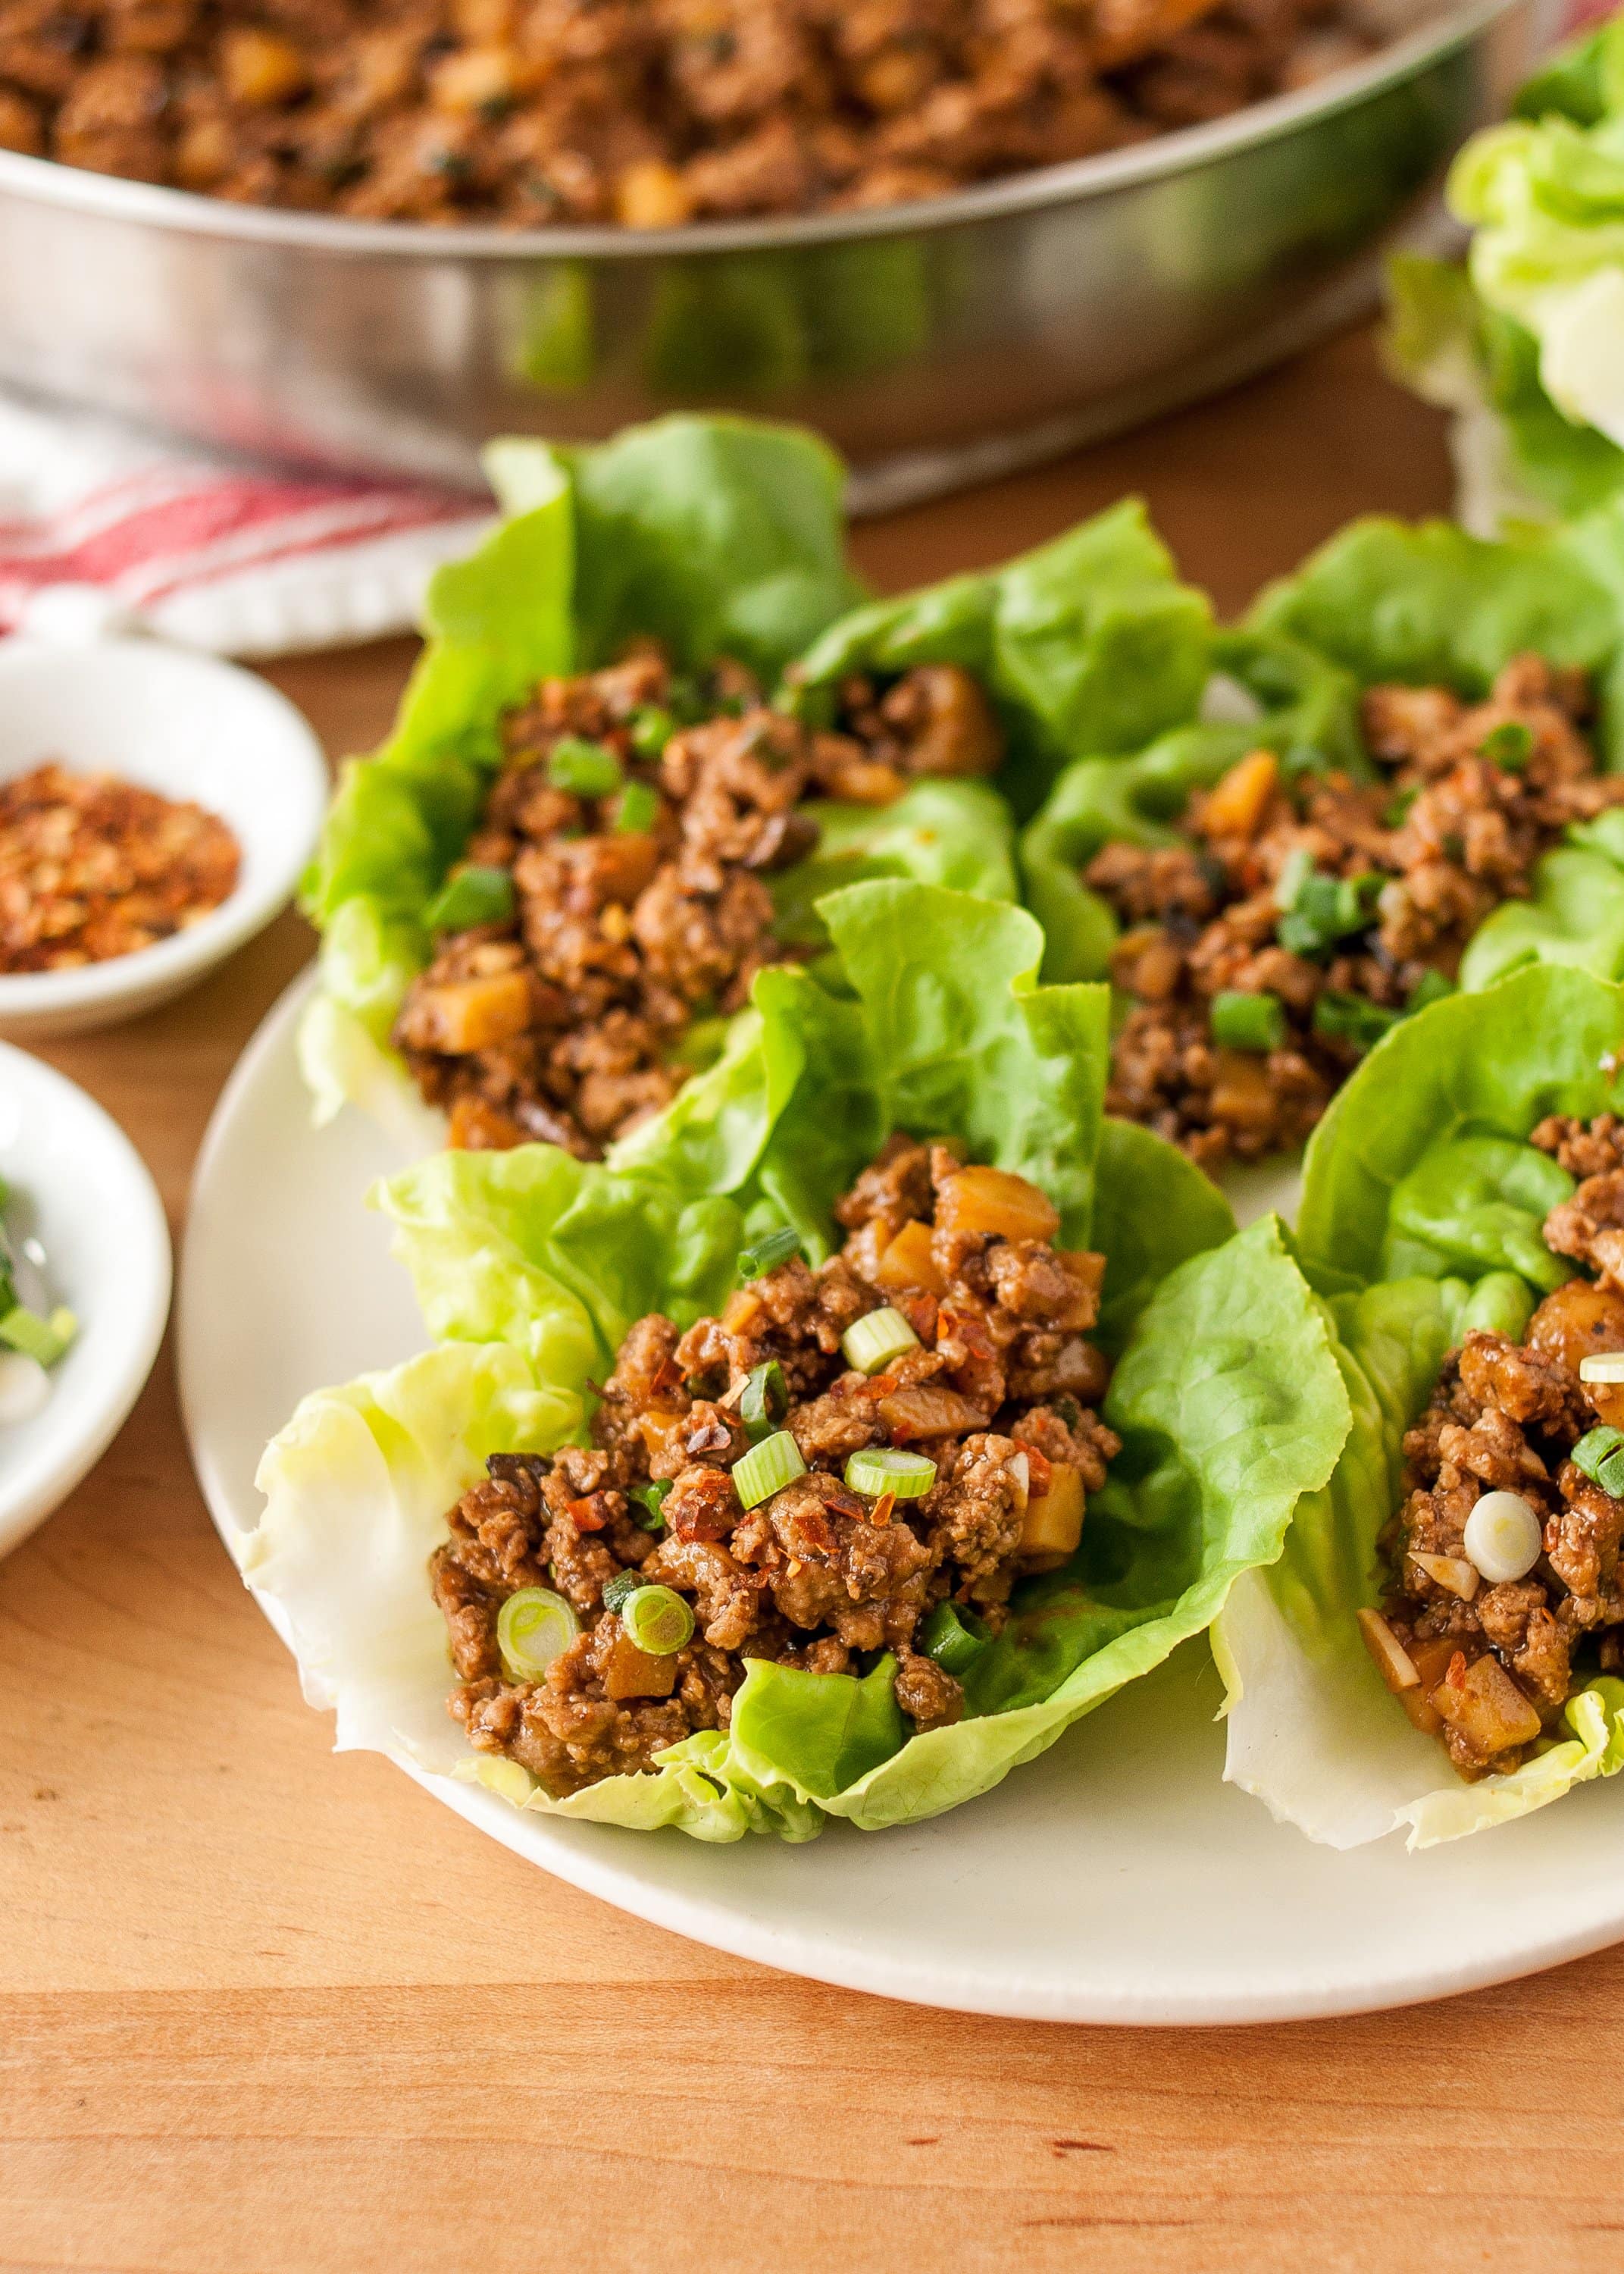 How To Make Chicken Lettuce Wraps | Kitchn